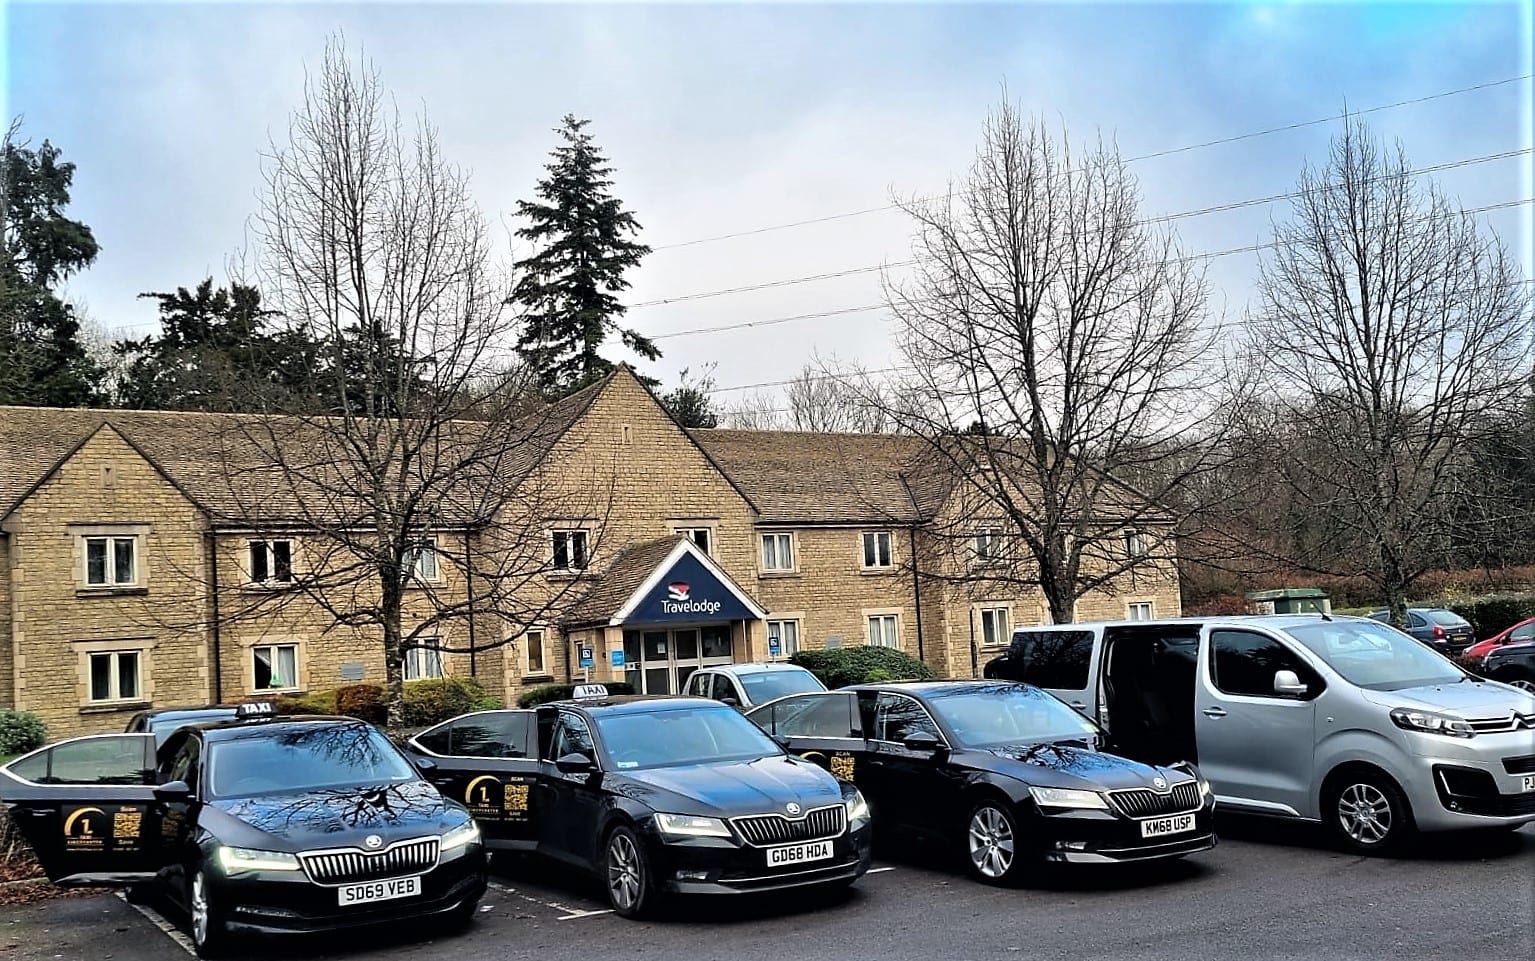 First Taxi Cirencester, UK, airport transfer
